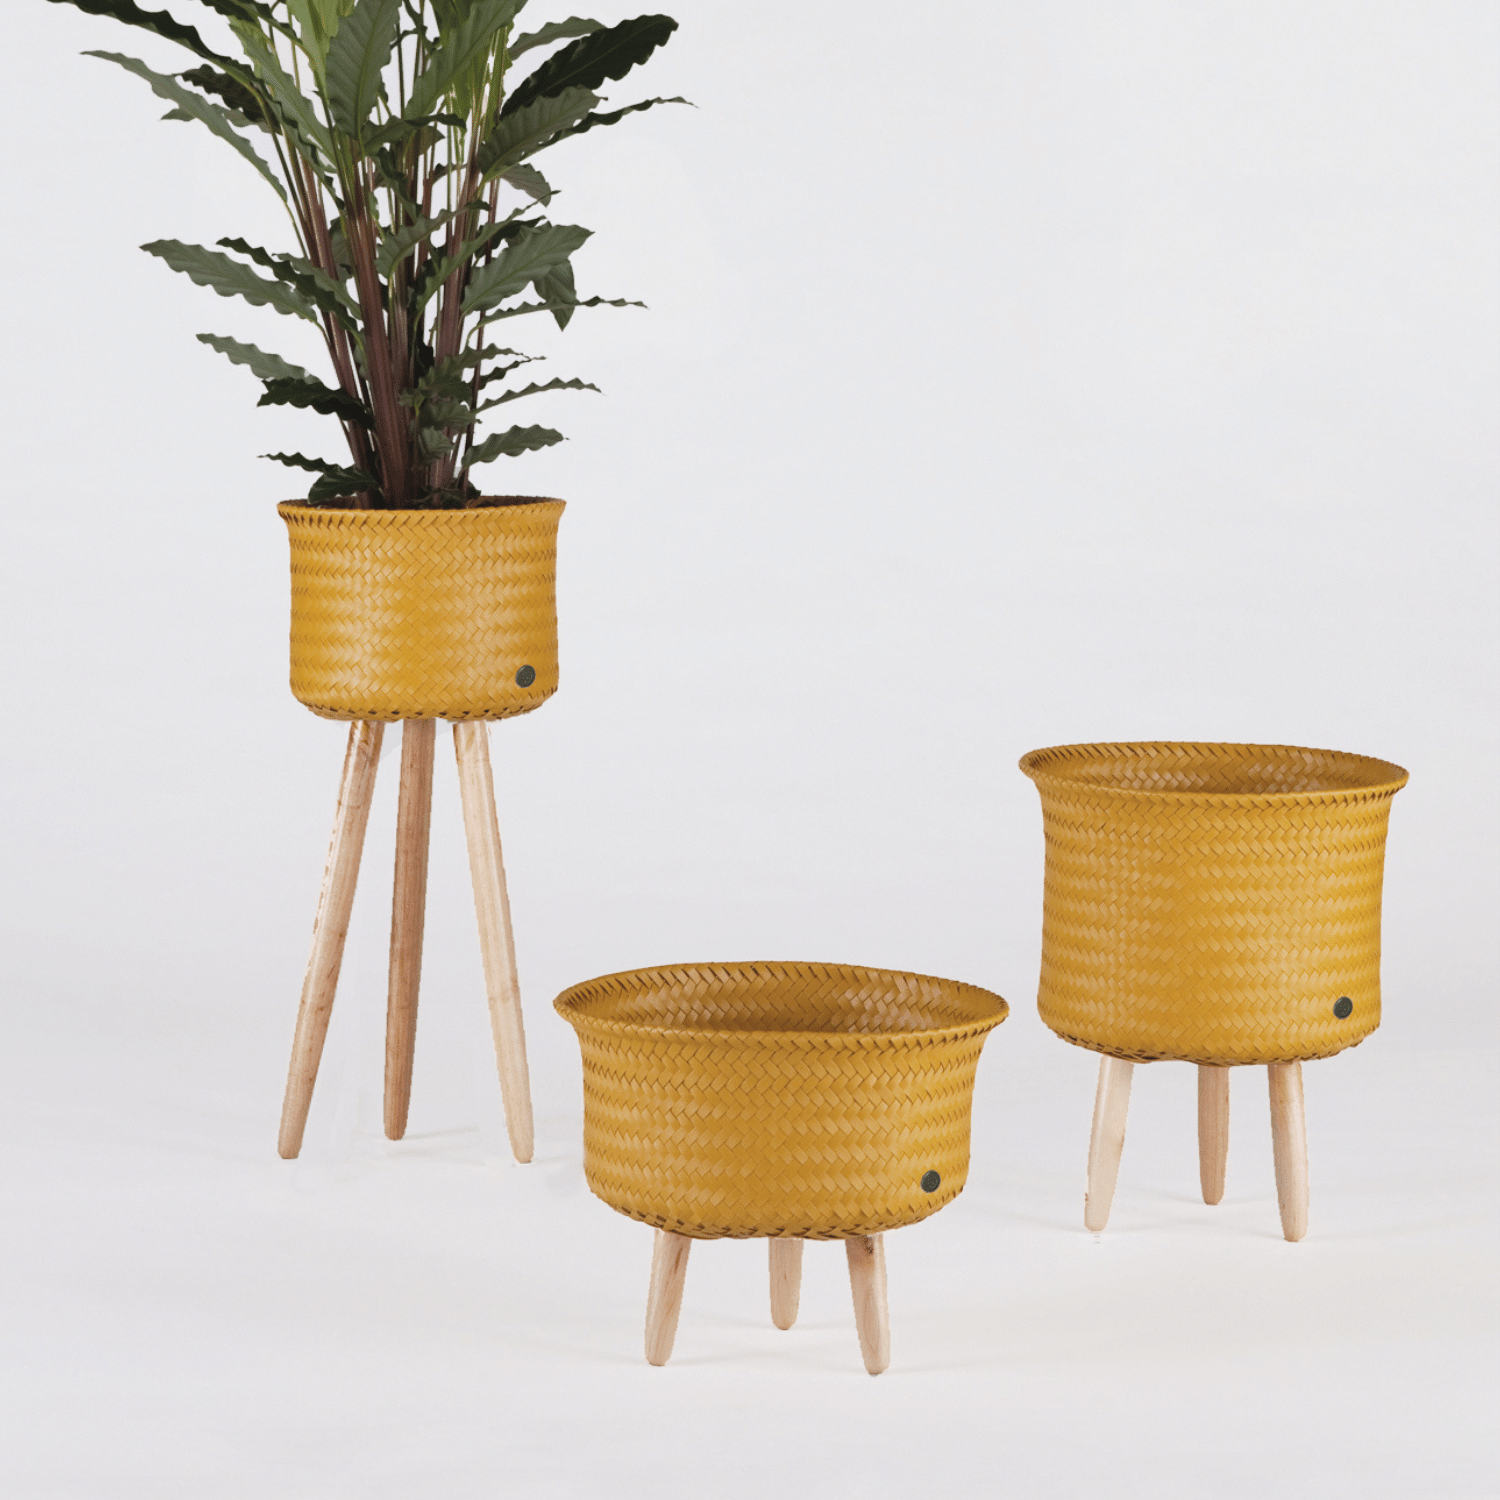 UP collection handed by cachepots jaune moutarde sur pied en bois 3 tailles